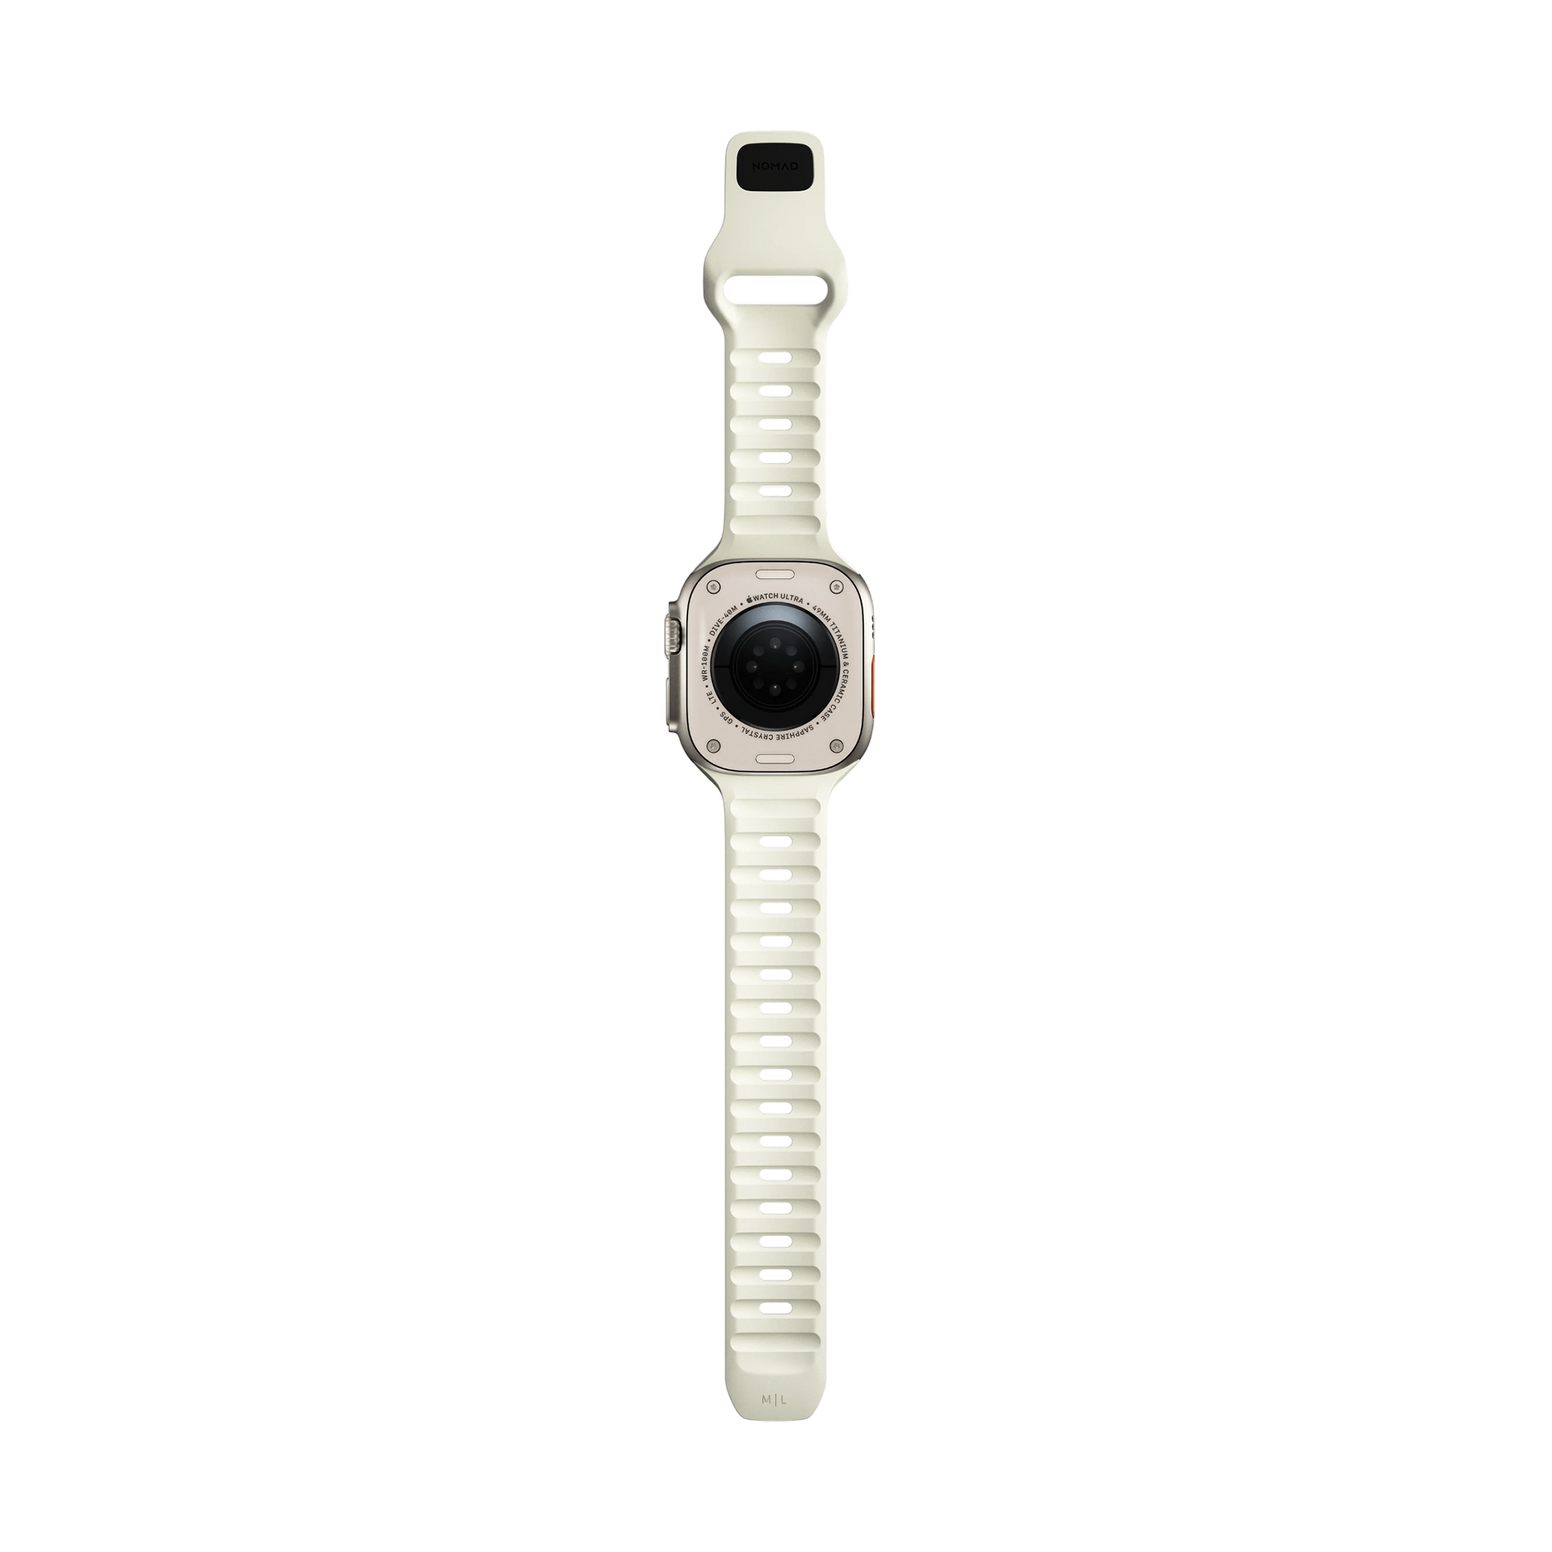 Nomad Sport Band - 45/49mm - Glow V1 - Limited Edition - Exclusive to MegaMac - Discontinued